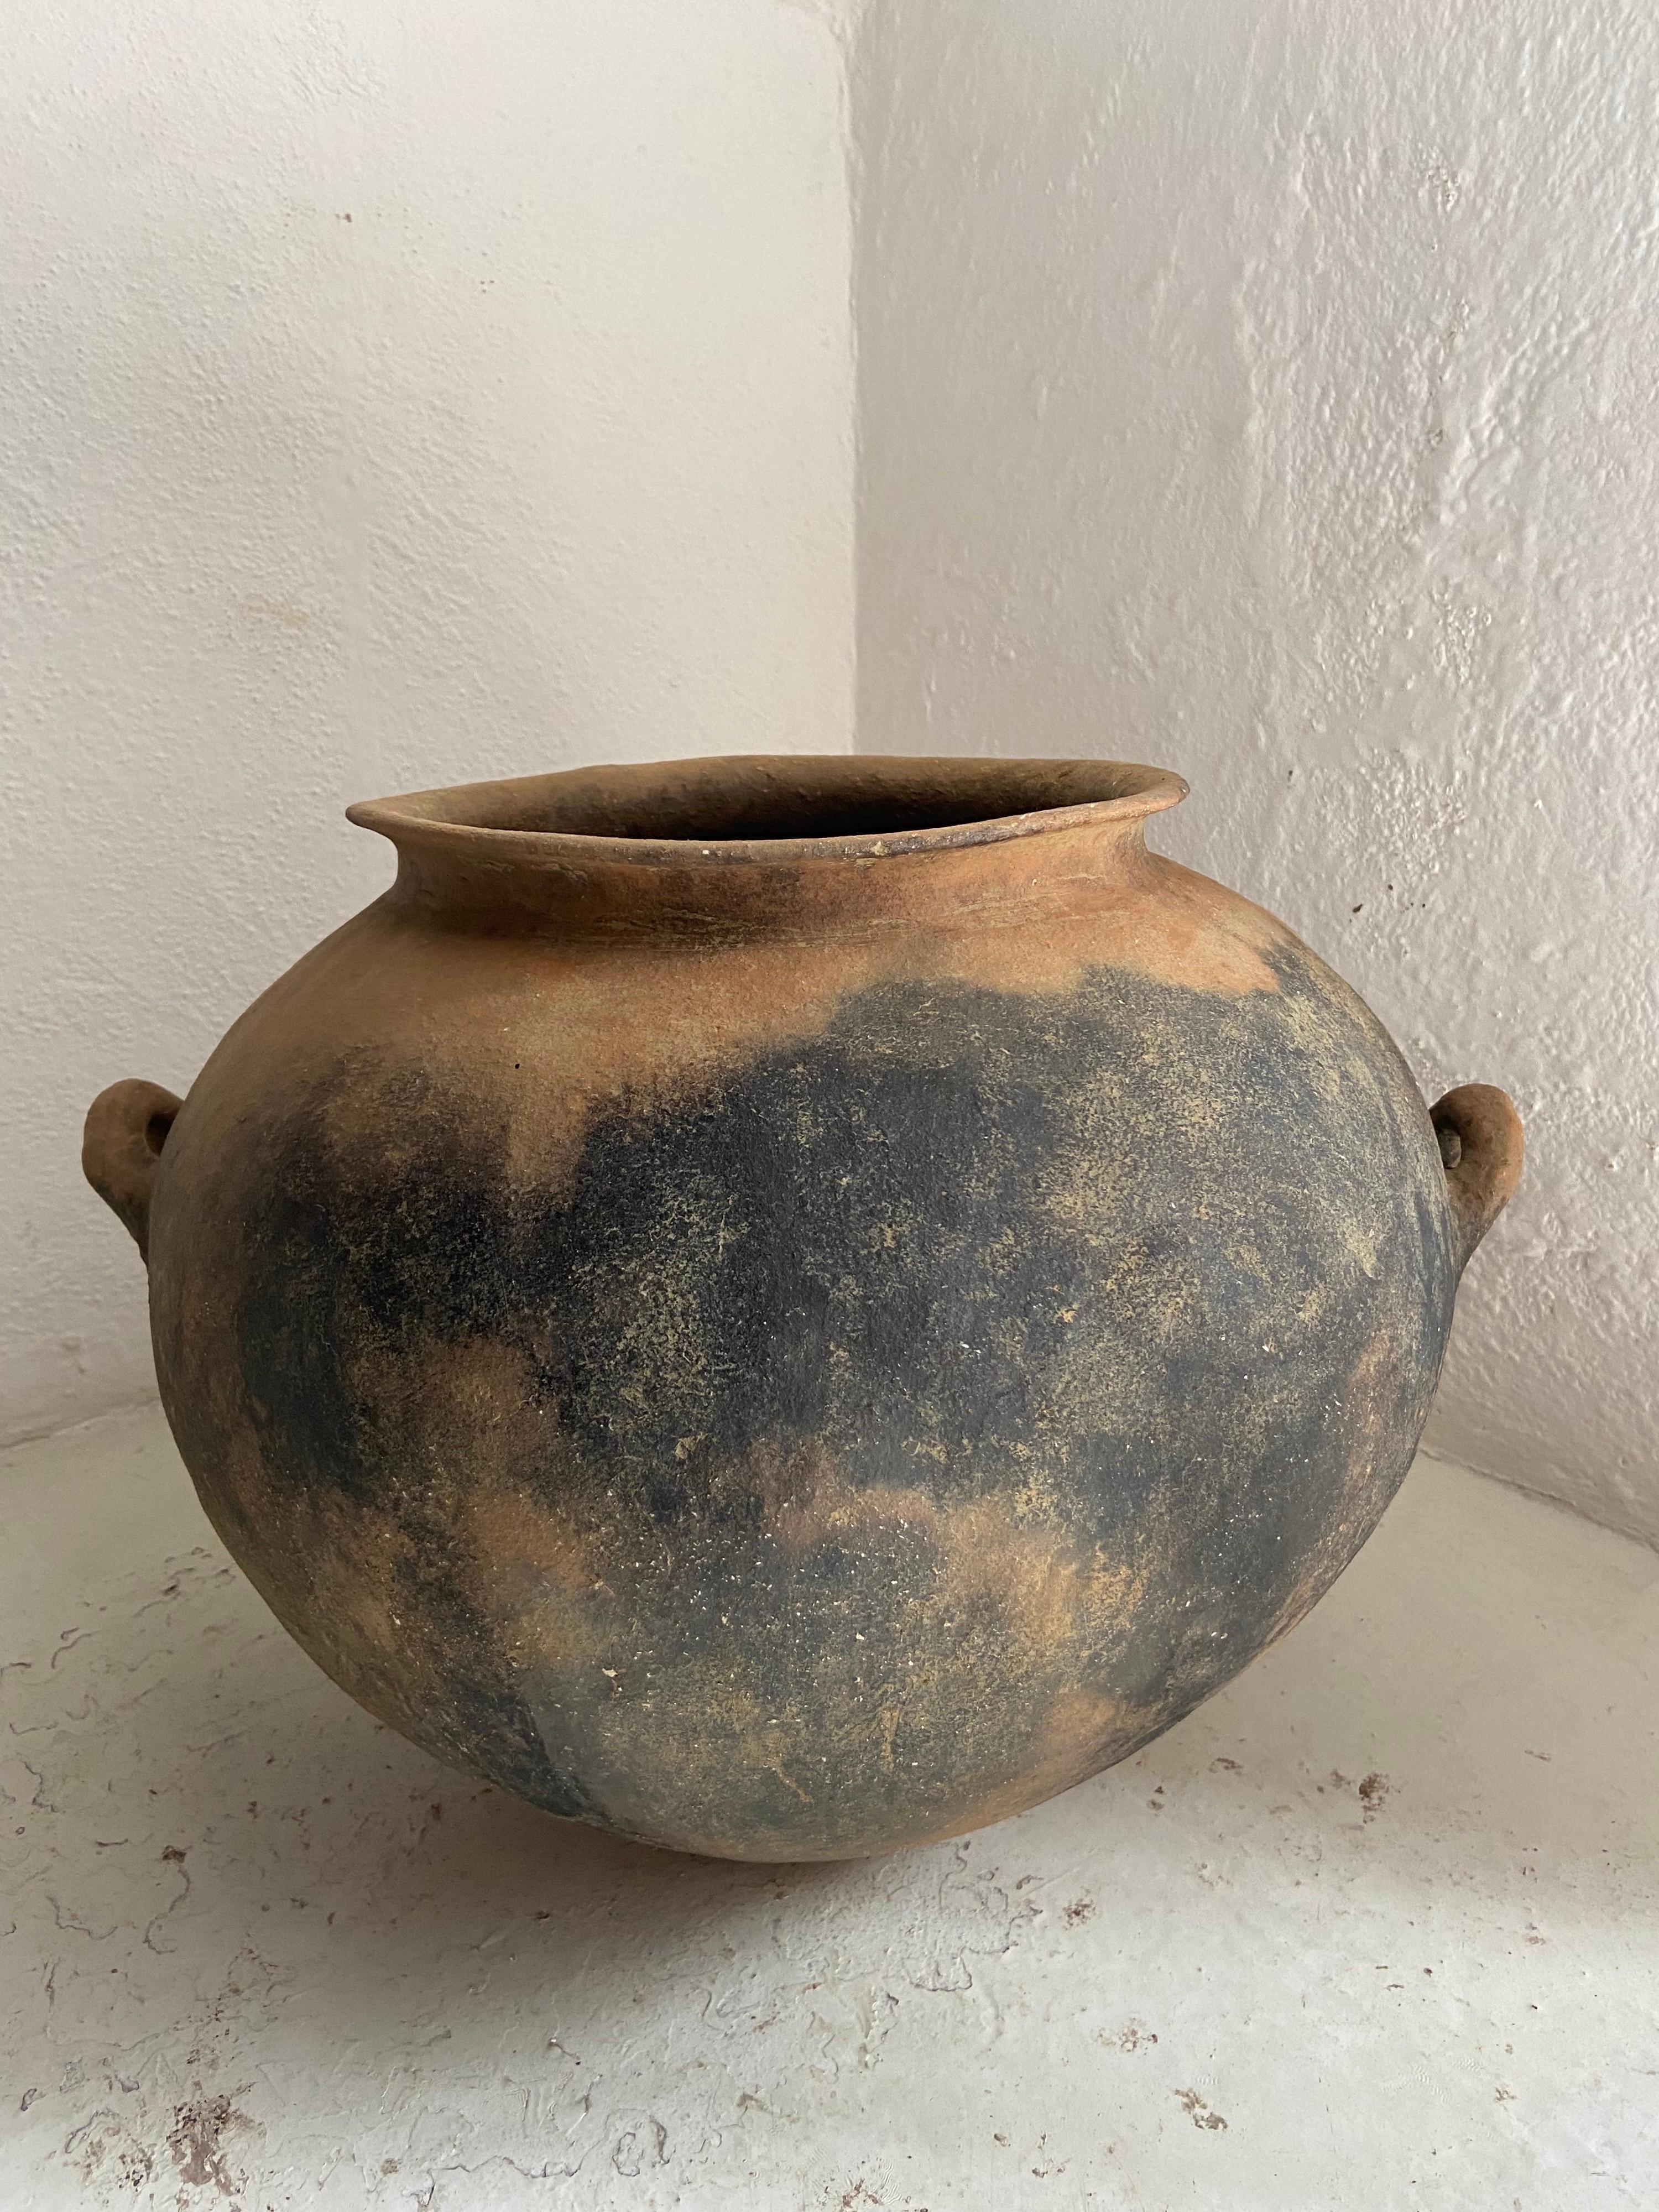 Fired Early 20th Century Water Jar from Central Mexico